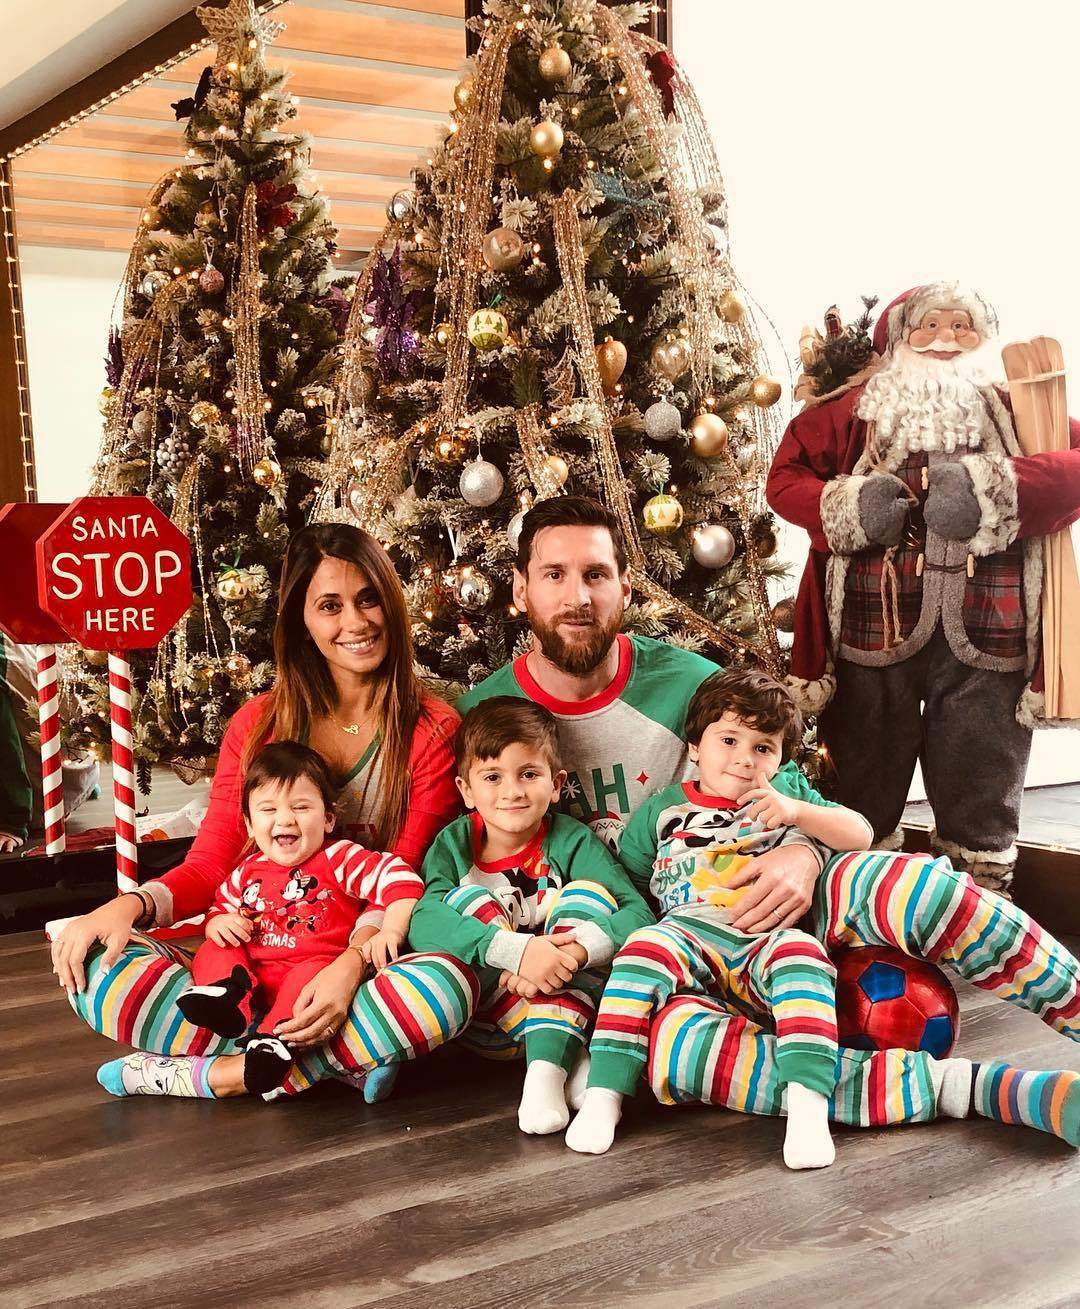 Lionel Messi's wife shares lovely family photo as they celebrate Christmas